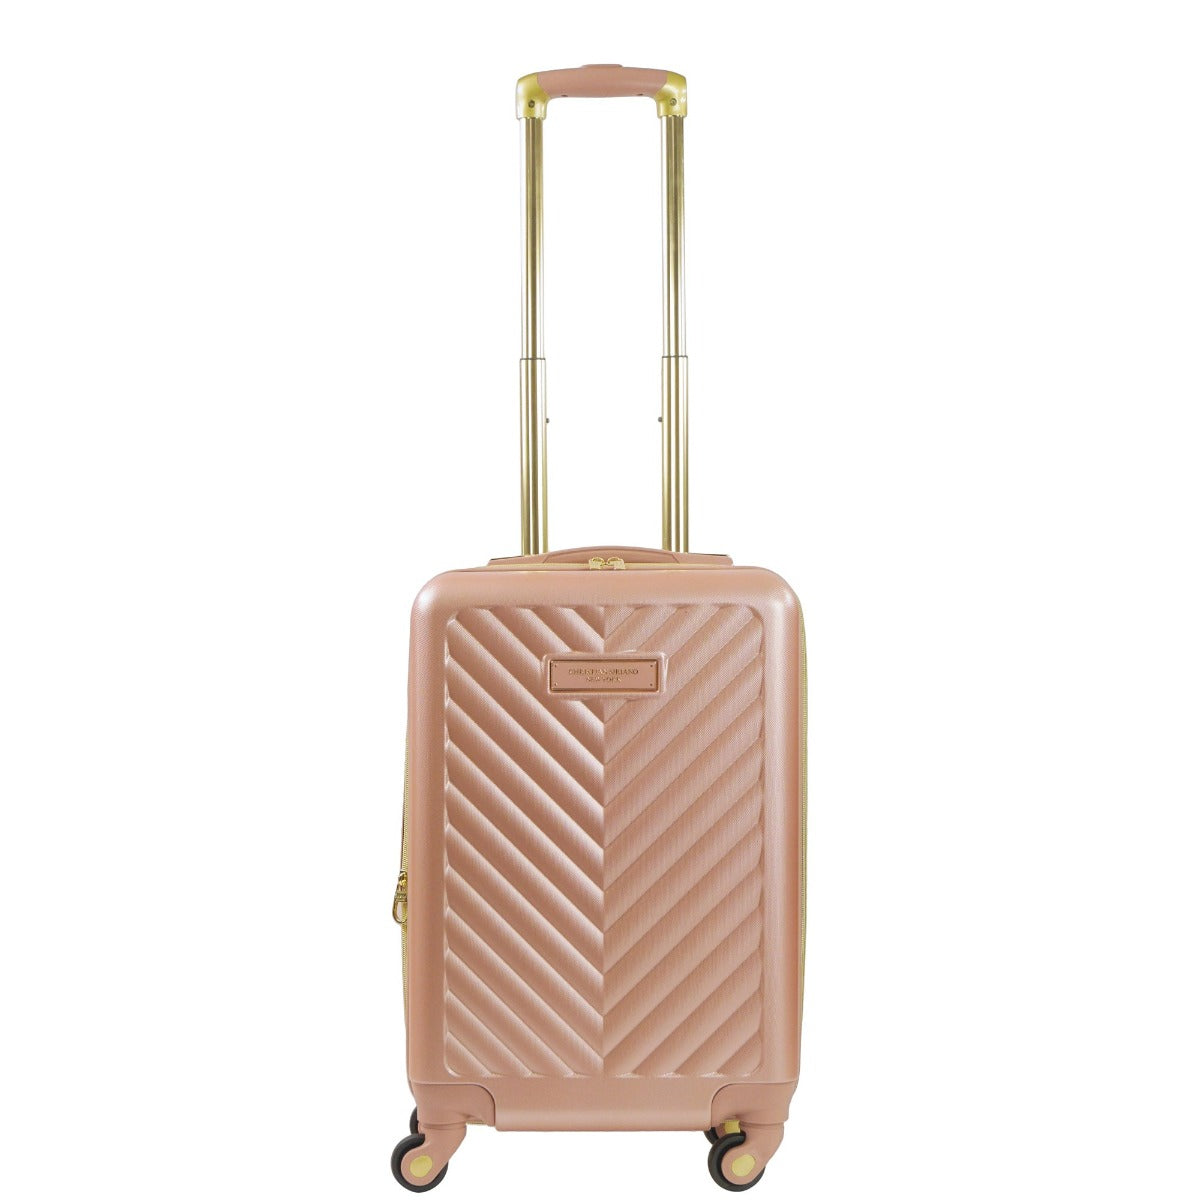 Christian Siriano Addie 22" hardside spinner suitcase luggage rose gold - best suitcases for travelling